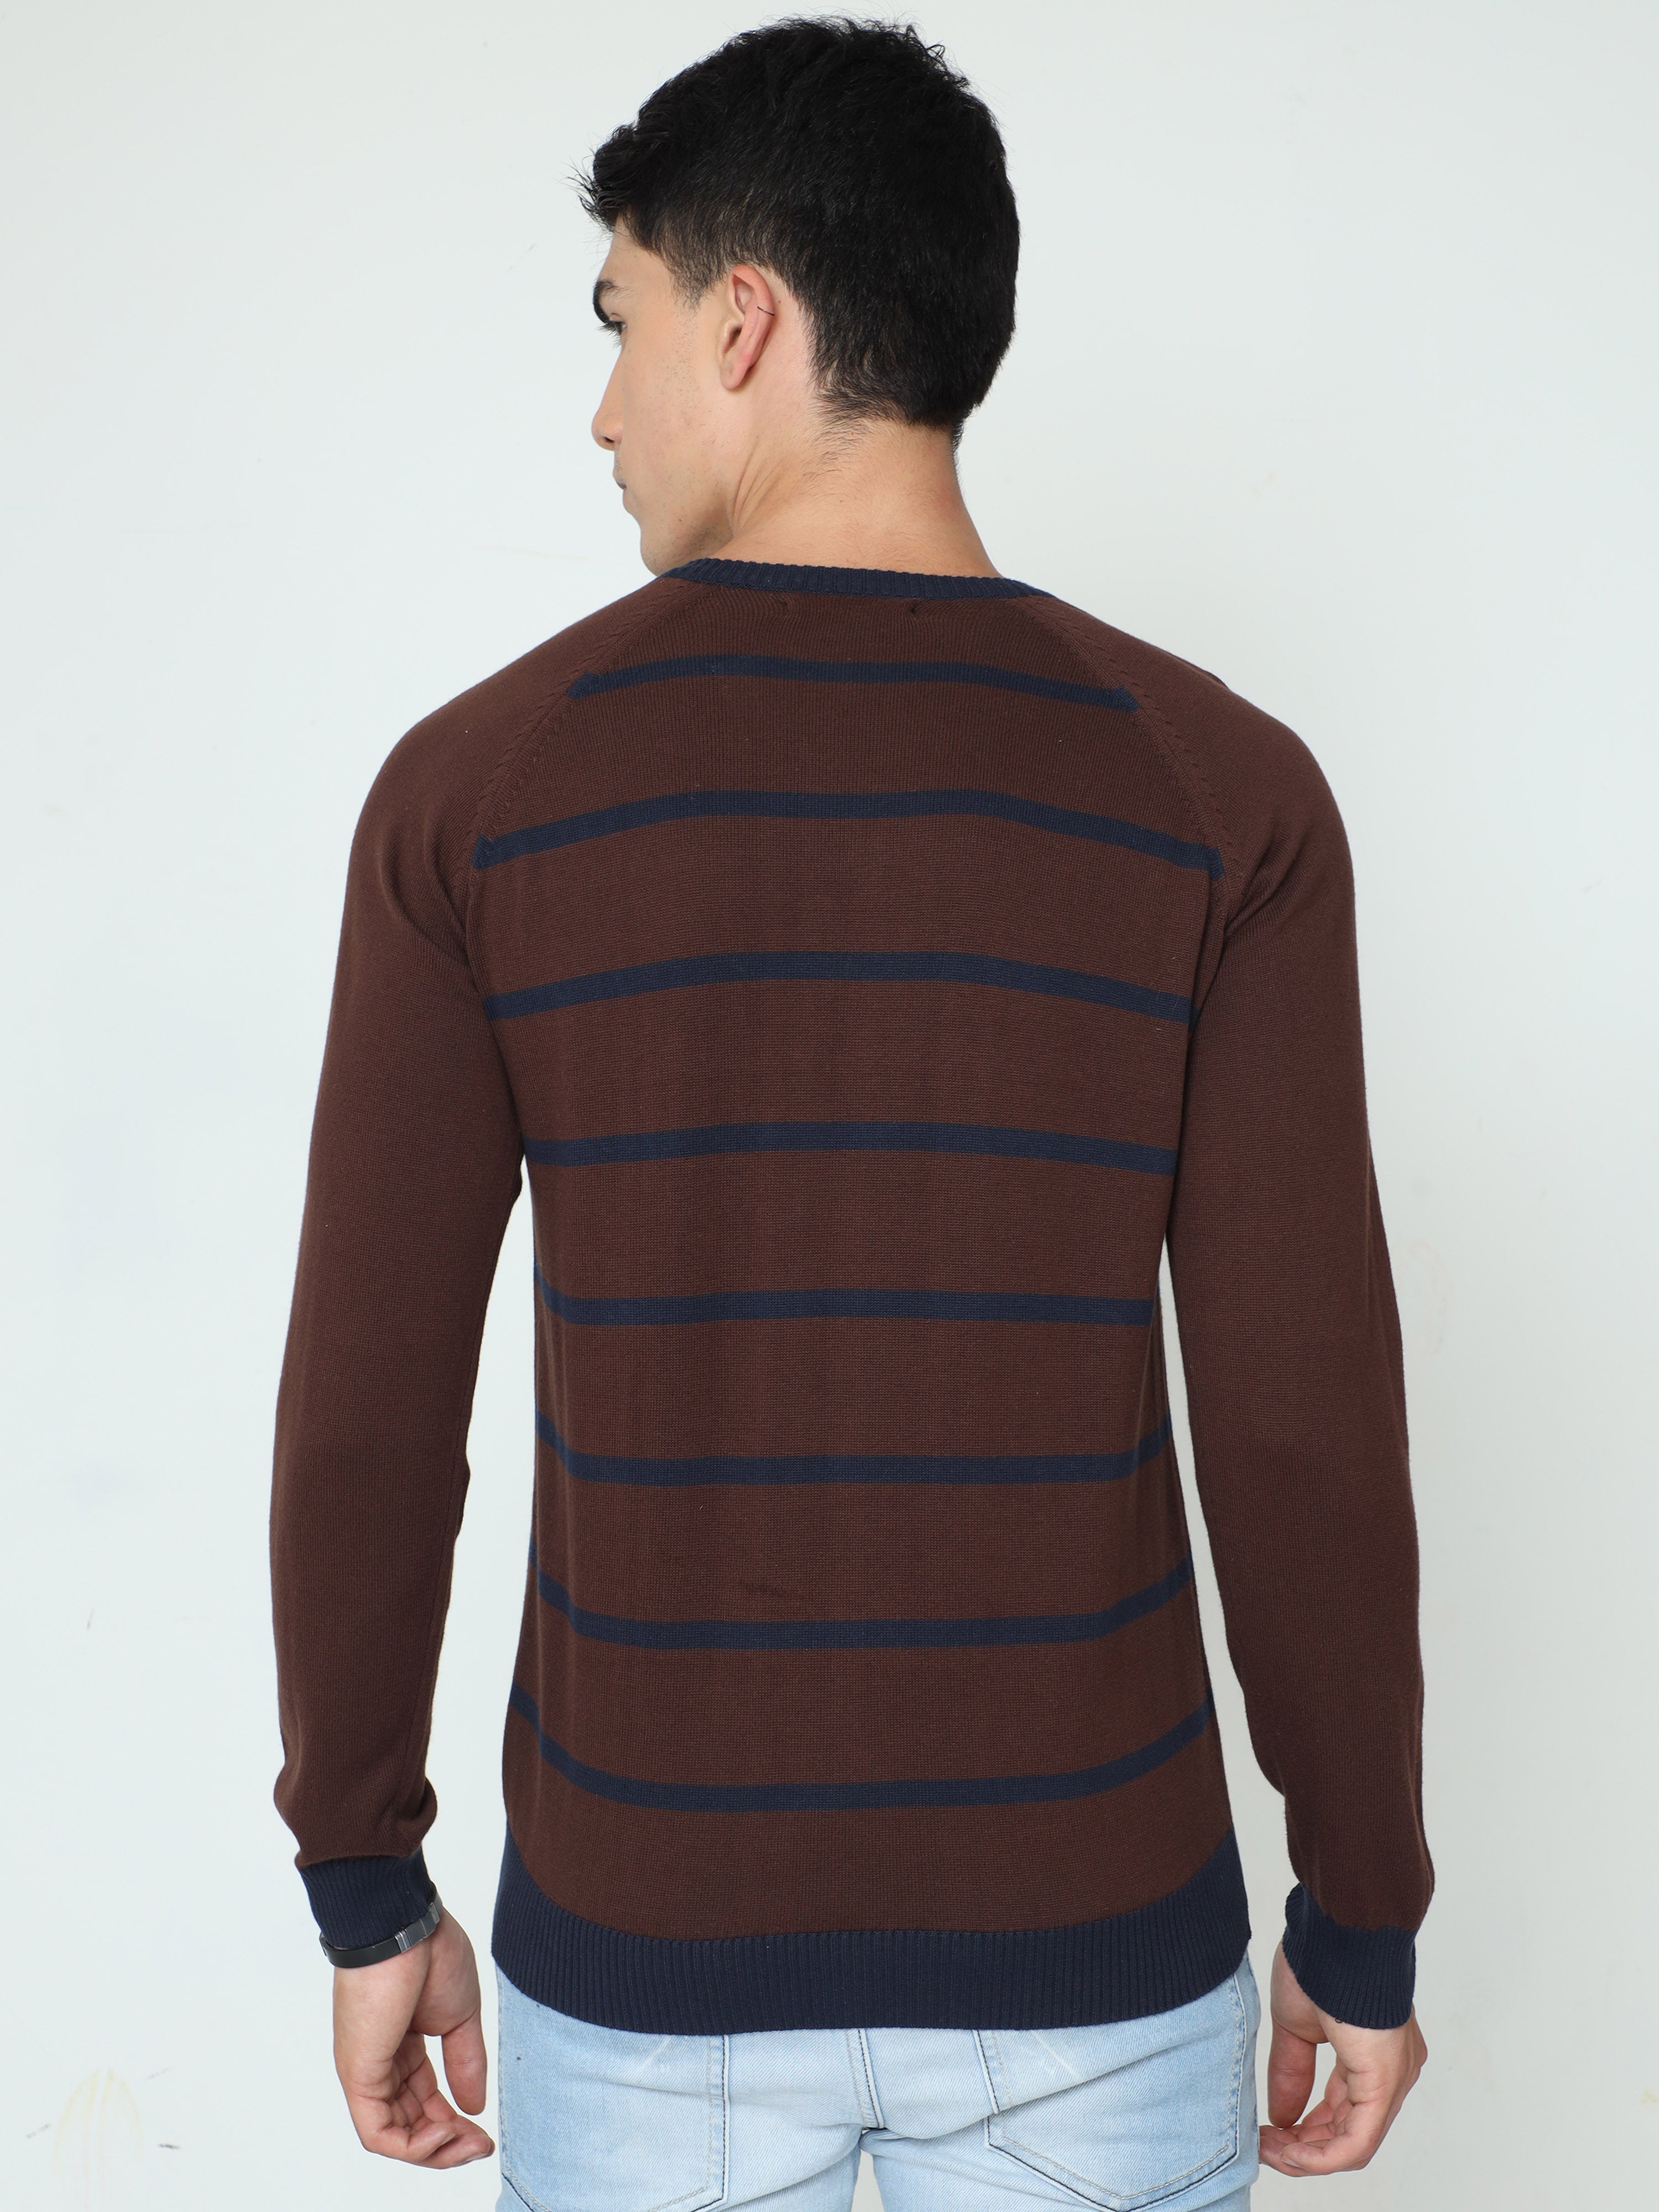 Classic Polo Mens 100% Cotton Maroon Striped V Neck Full Sleeves Slim Fit Sweater |Cp-Swt-05